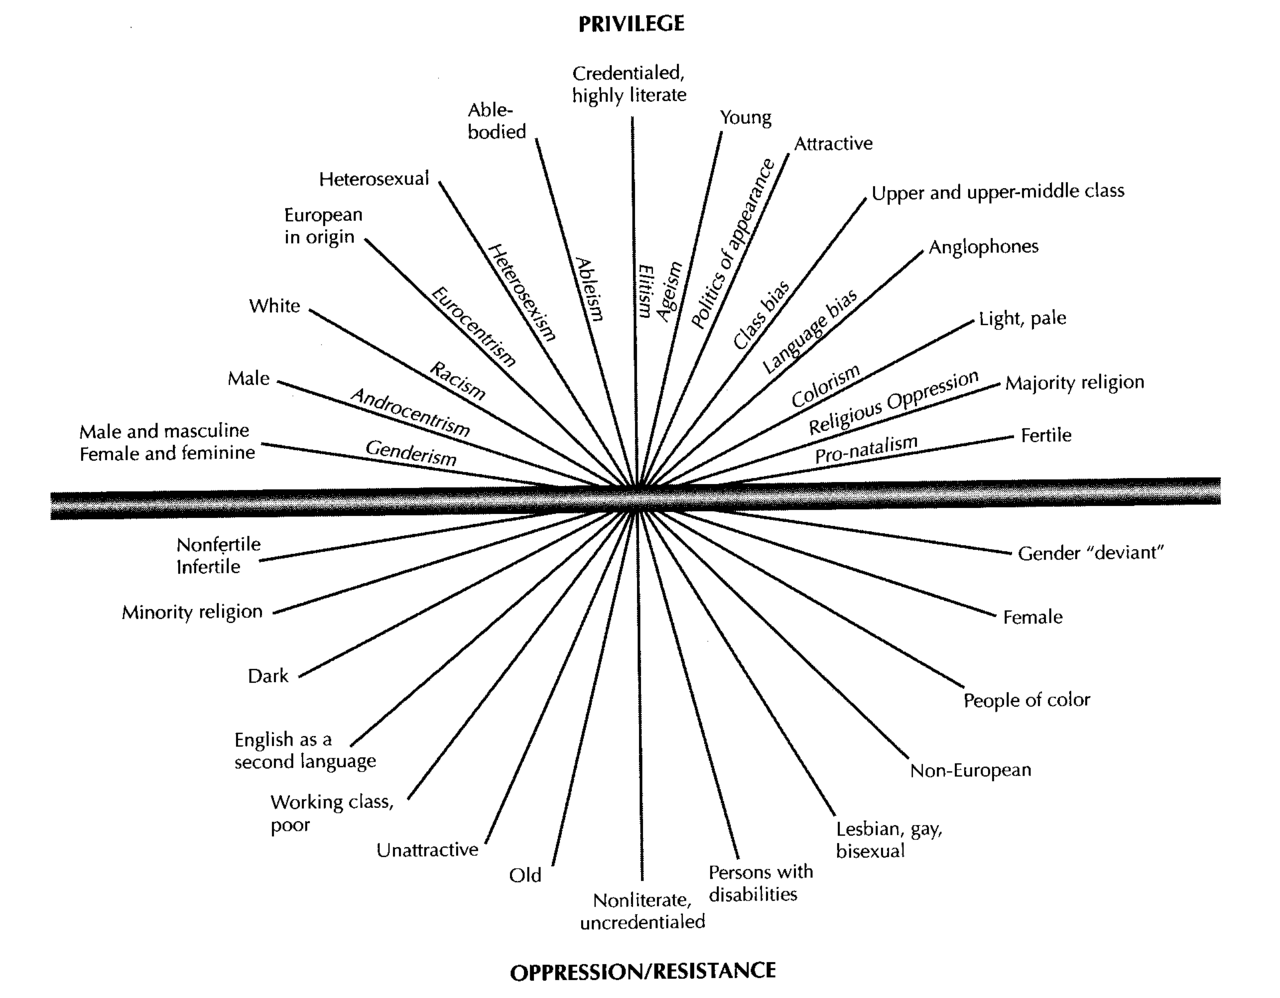 This simple information graphic depicts various forms of privilege and oppression as a set of multiple spectra (lines) that all intersect at a central point. The ends of each line is labelled with the “privilege” on the top half of the graphic and its corresponding “oppression/resistance” on the bottom half, while the line itself is labeled with the associated “-ism”. While the graphic doesn’t use the term, it can therefore be considered a visualization of kyriarchy.